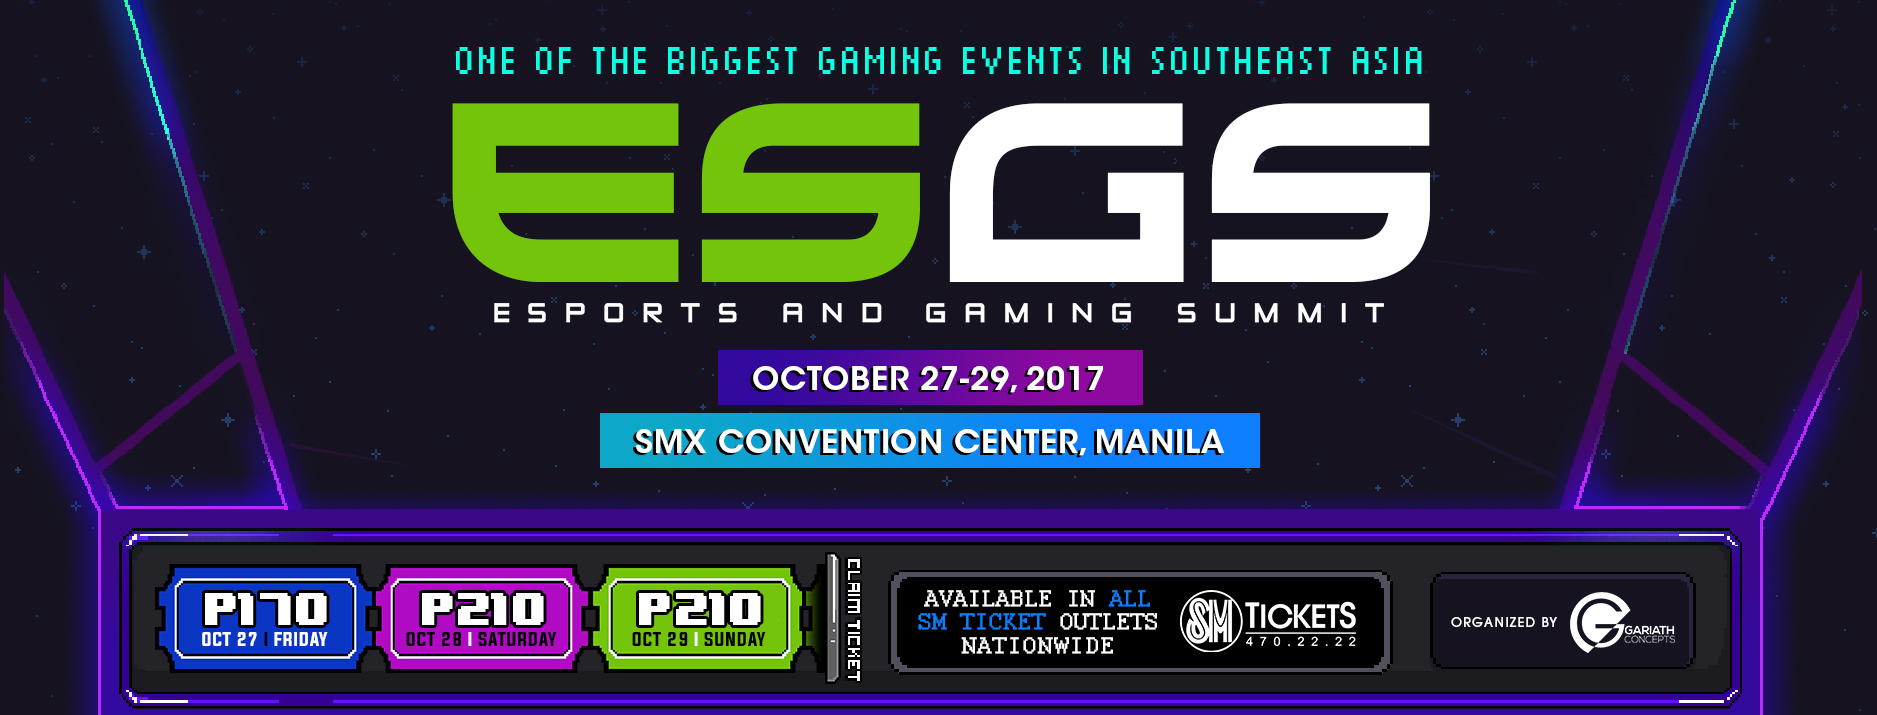 Here’s What to Look Forward to at ESGS 2017